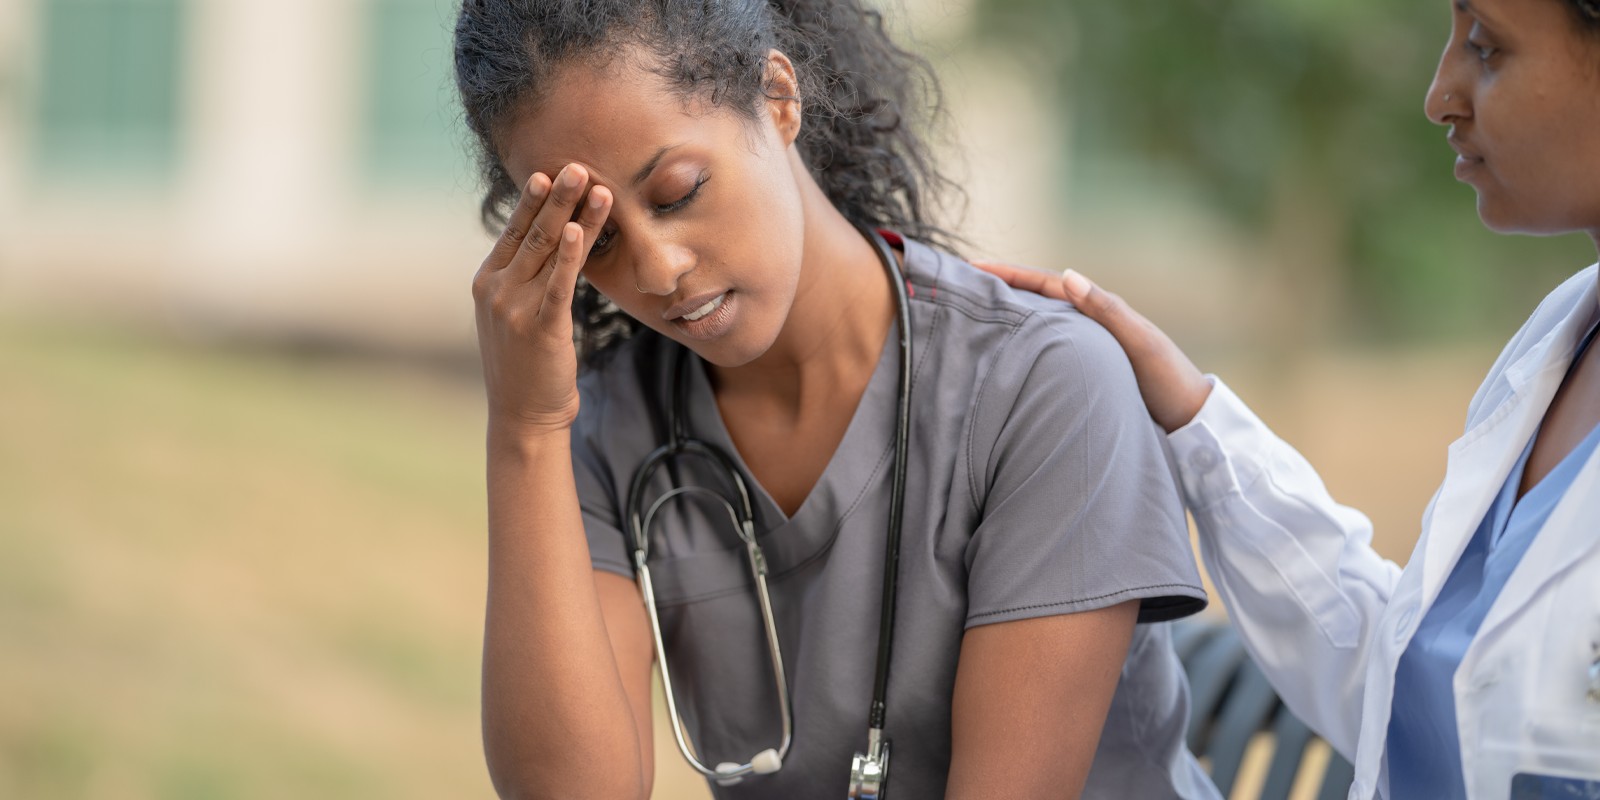 A union voice can help address burnout among health care workers nationwide